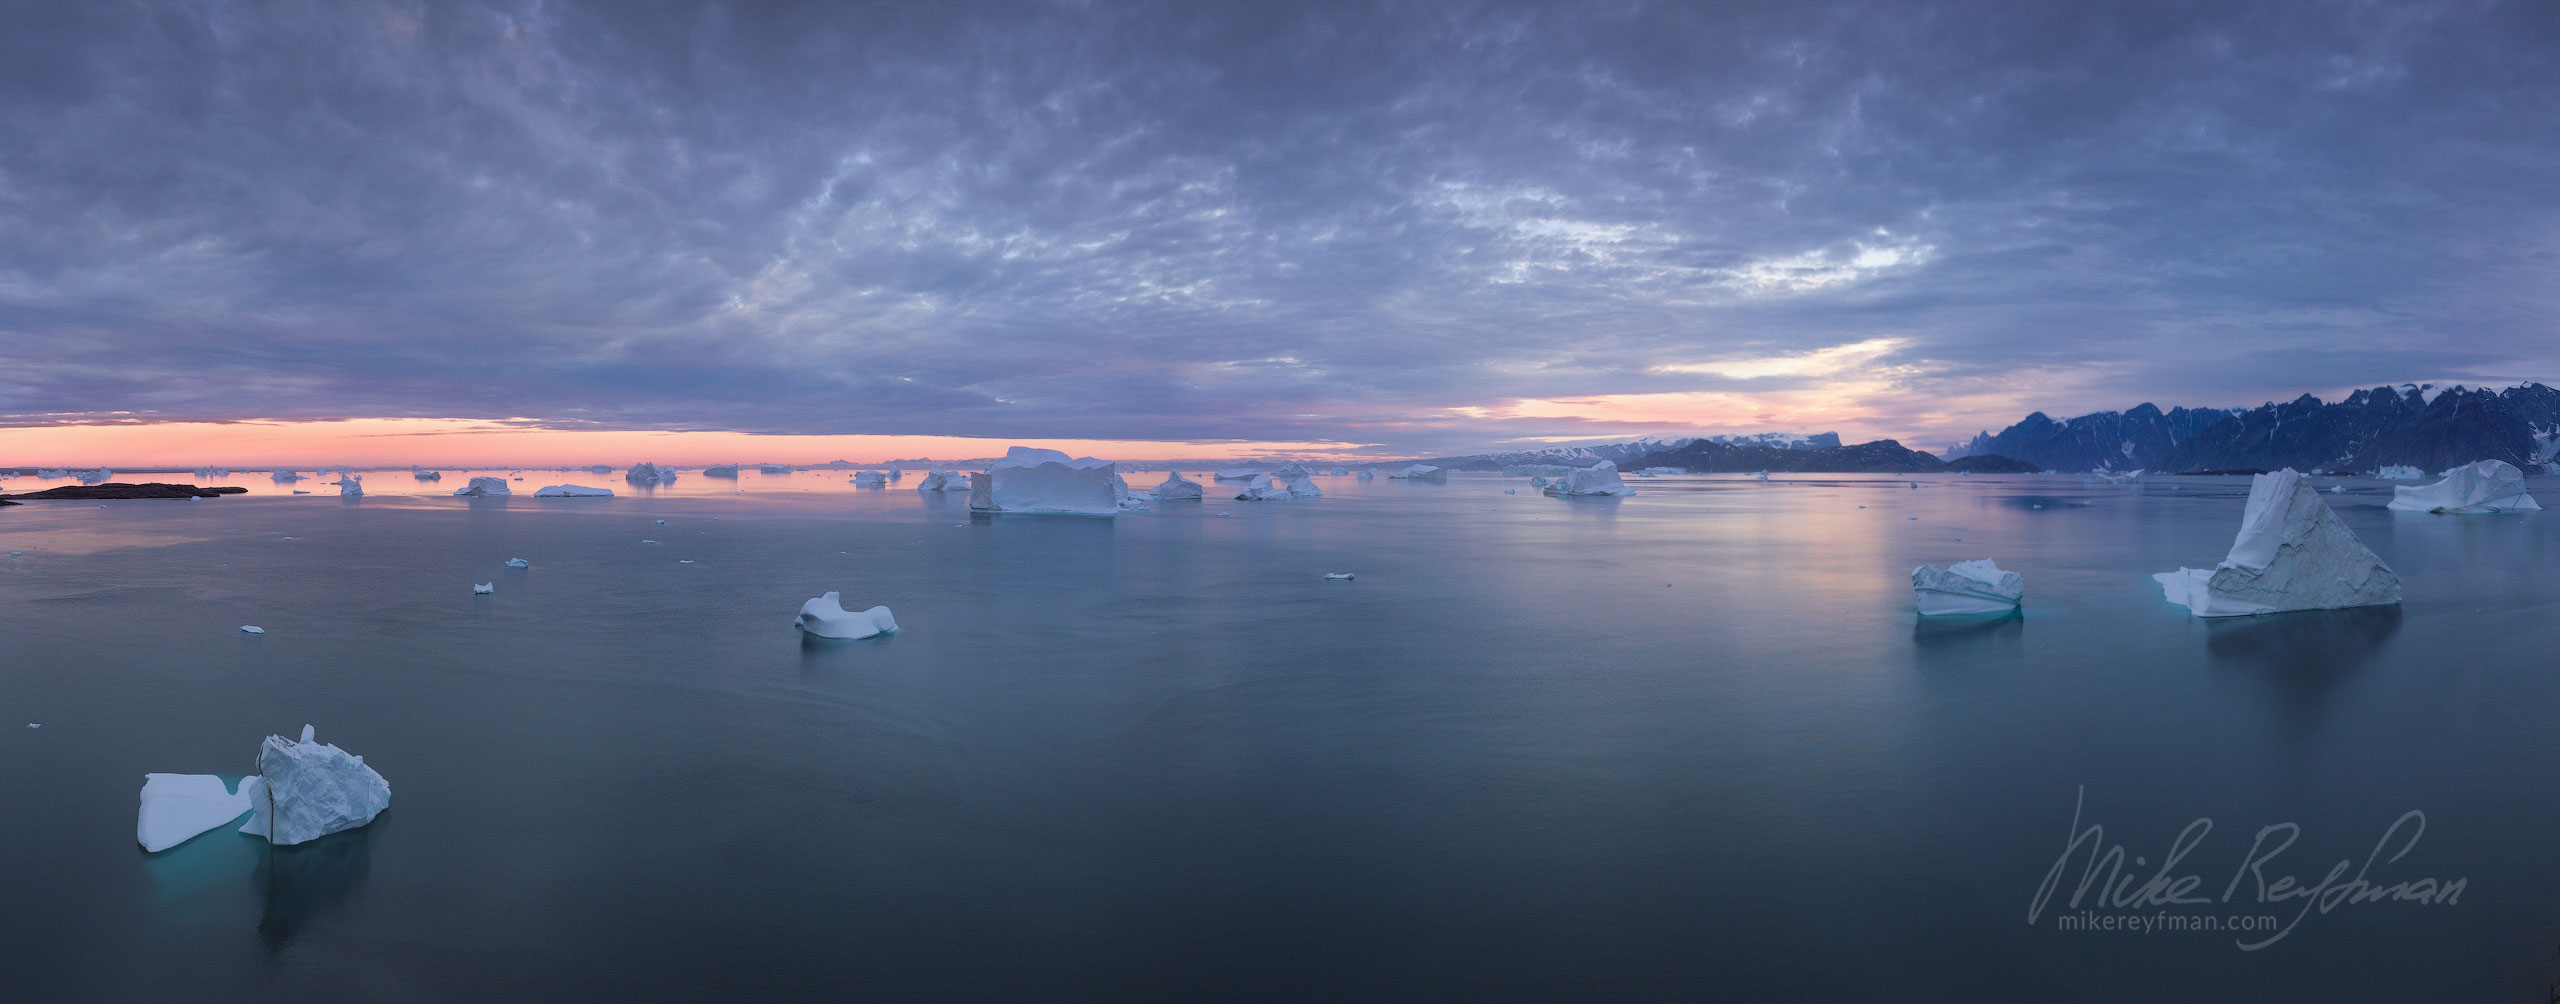 Icebergs in Scoresby Sund. Greenland. Aerial. 076-GR-SCDJI_0378_Pano-1x2.55 - The Scoresby Sund fjord system and the settlement of Ittoqqortoormiit. East Greenland. - Mike Reyfman Photography